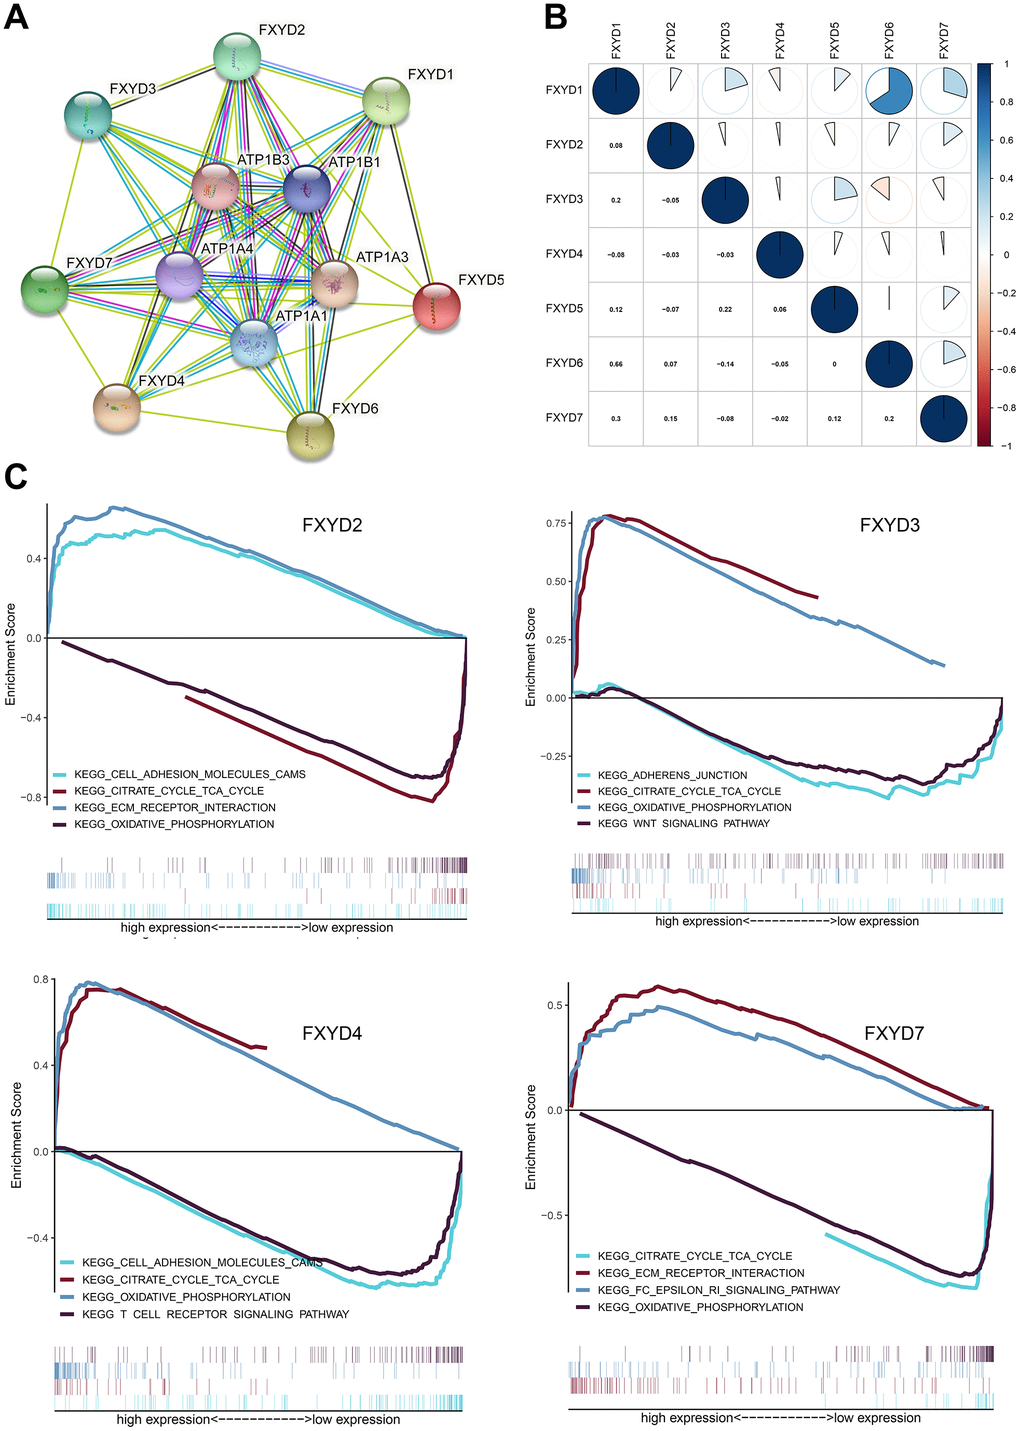 (A) Protein–protein interaction network among FXYD gene family members. (B) Correlations between FXYD family genes. (C) Kyoto Encyclopedia of Genes and Genomes (KEGG) enriched pathways associated with FXYD2, FXYD3, FXYD4 and FXYD7 in GSEA.